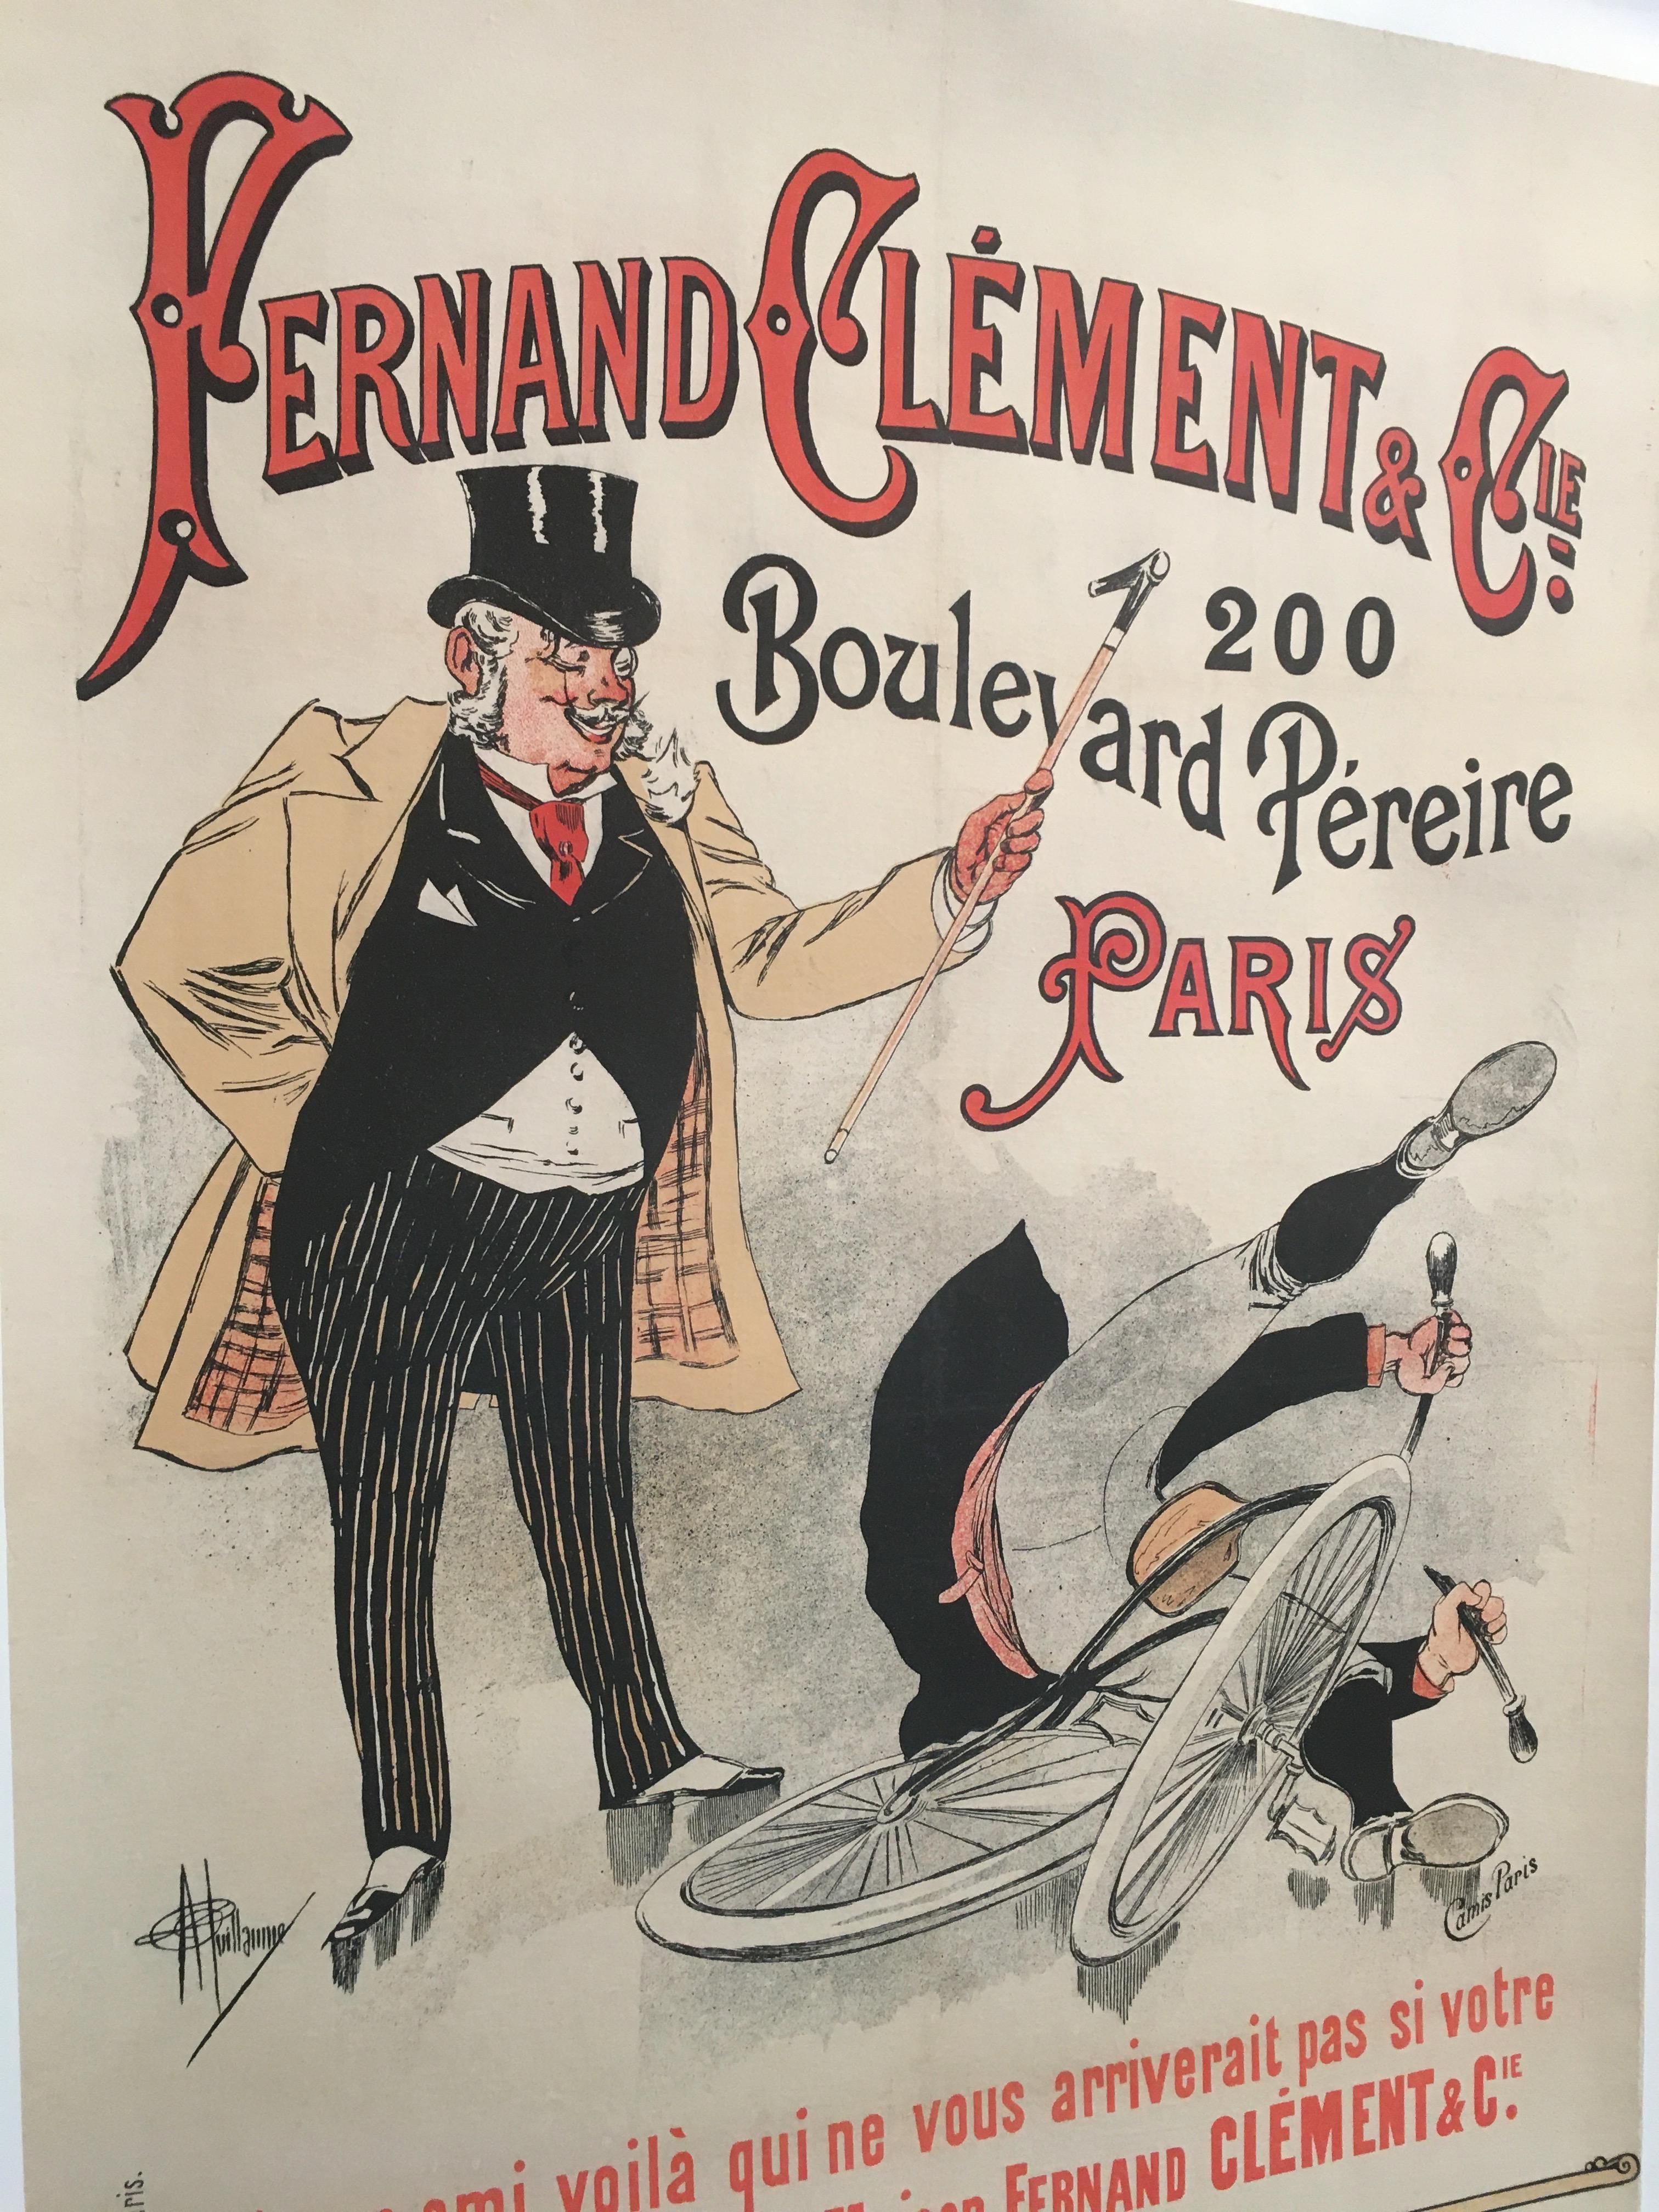 Original vintage French poster, 'Fernand Calment & Co', 1896 bicycle poster

Year:
1896

Dimensions: 
118 x 77 cm

Condition: 
Good

Format: 
Linen backed.